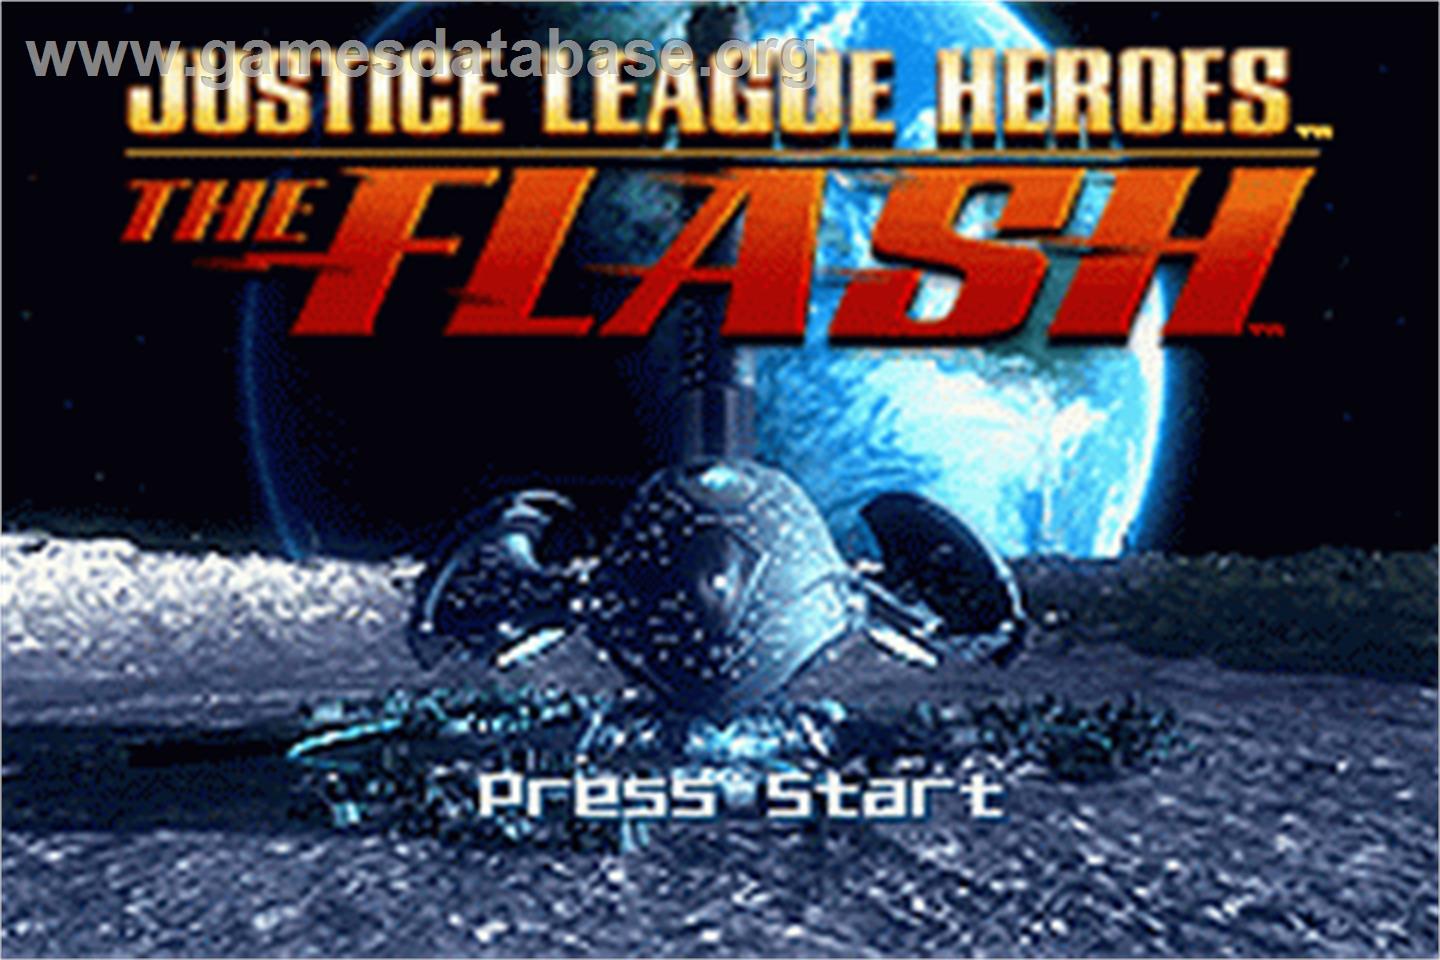 Justice League Heroes: The Flash - Nintendo Game Boy Advance - Artwork - Title Screen